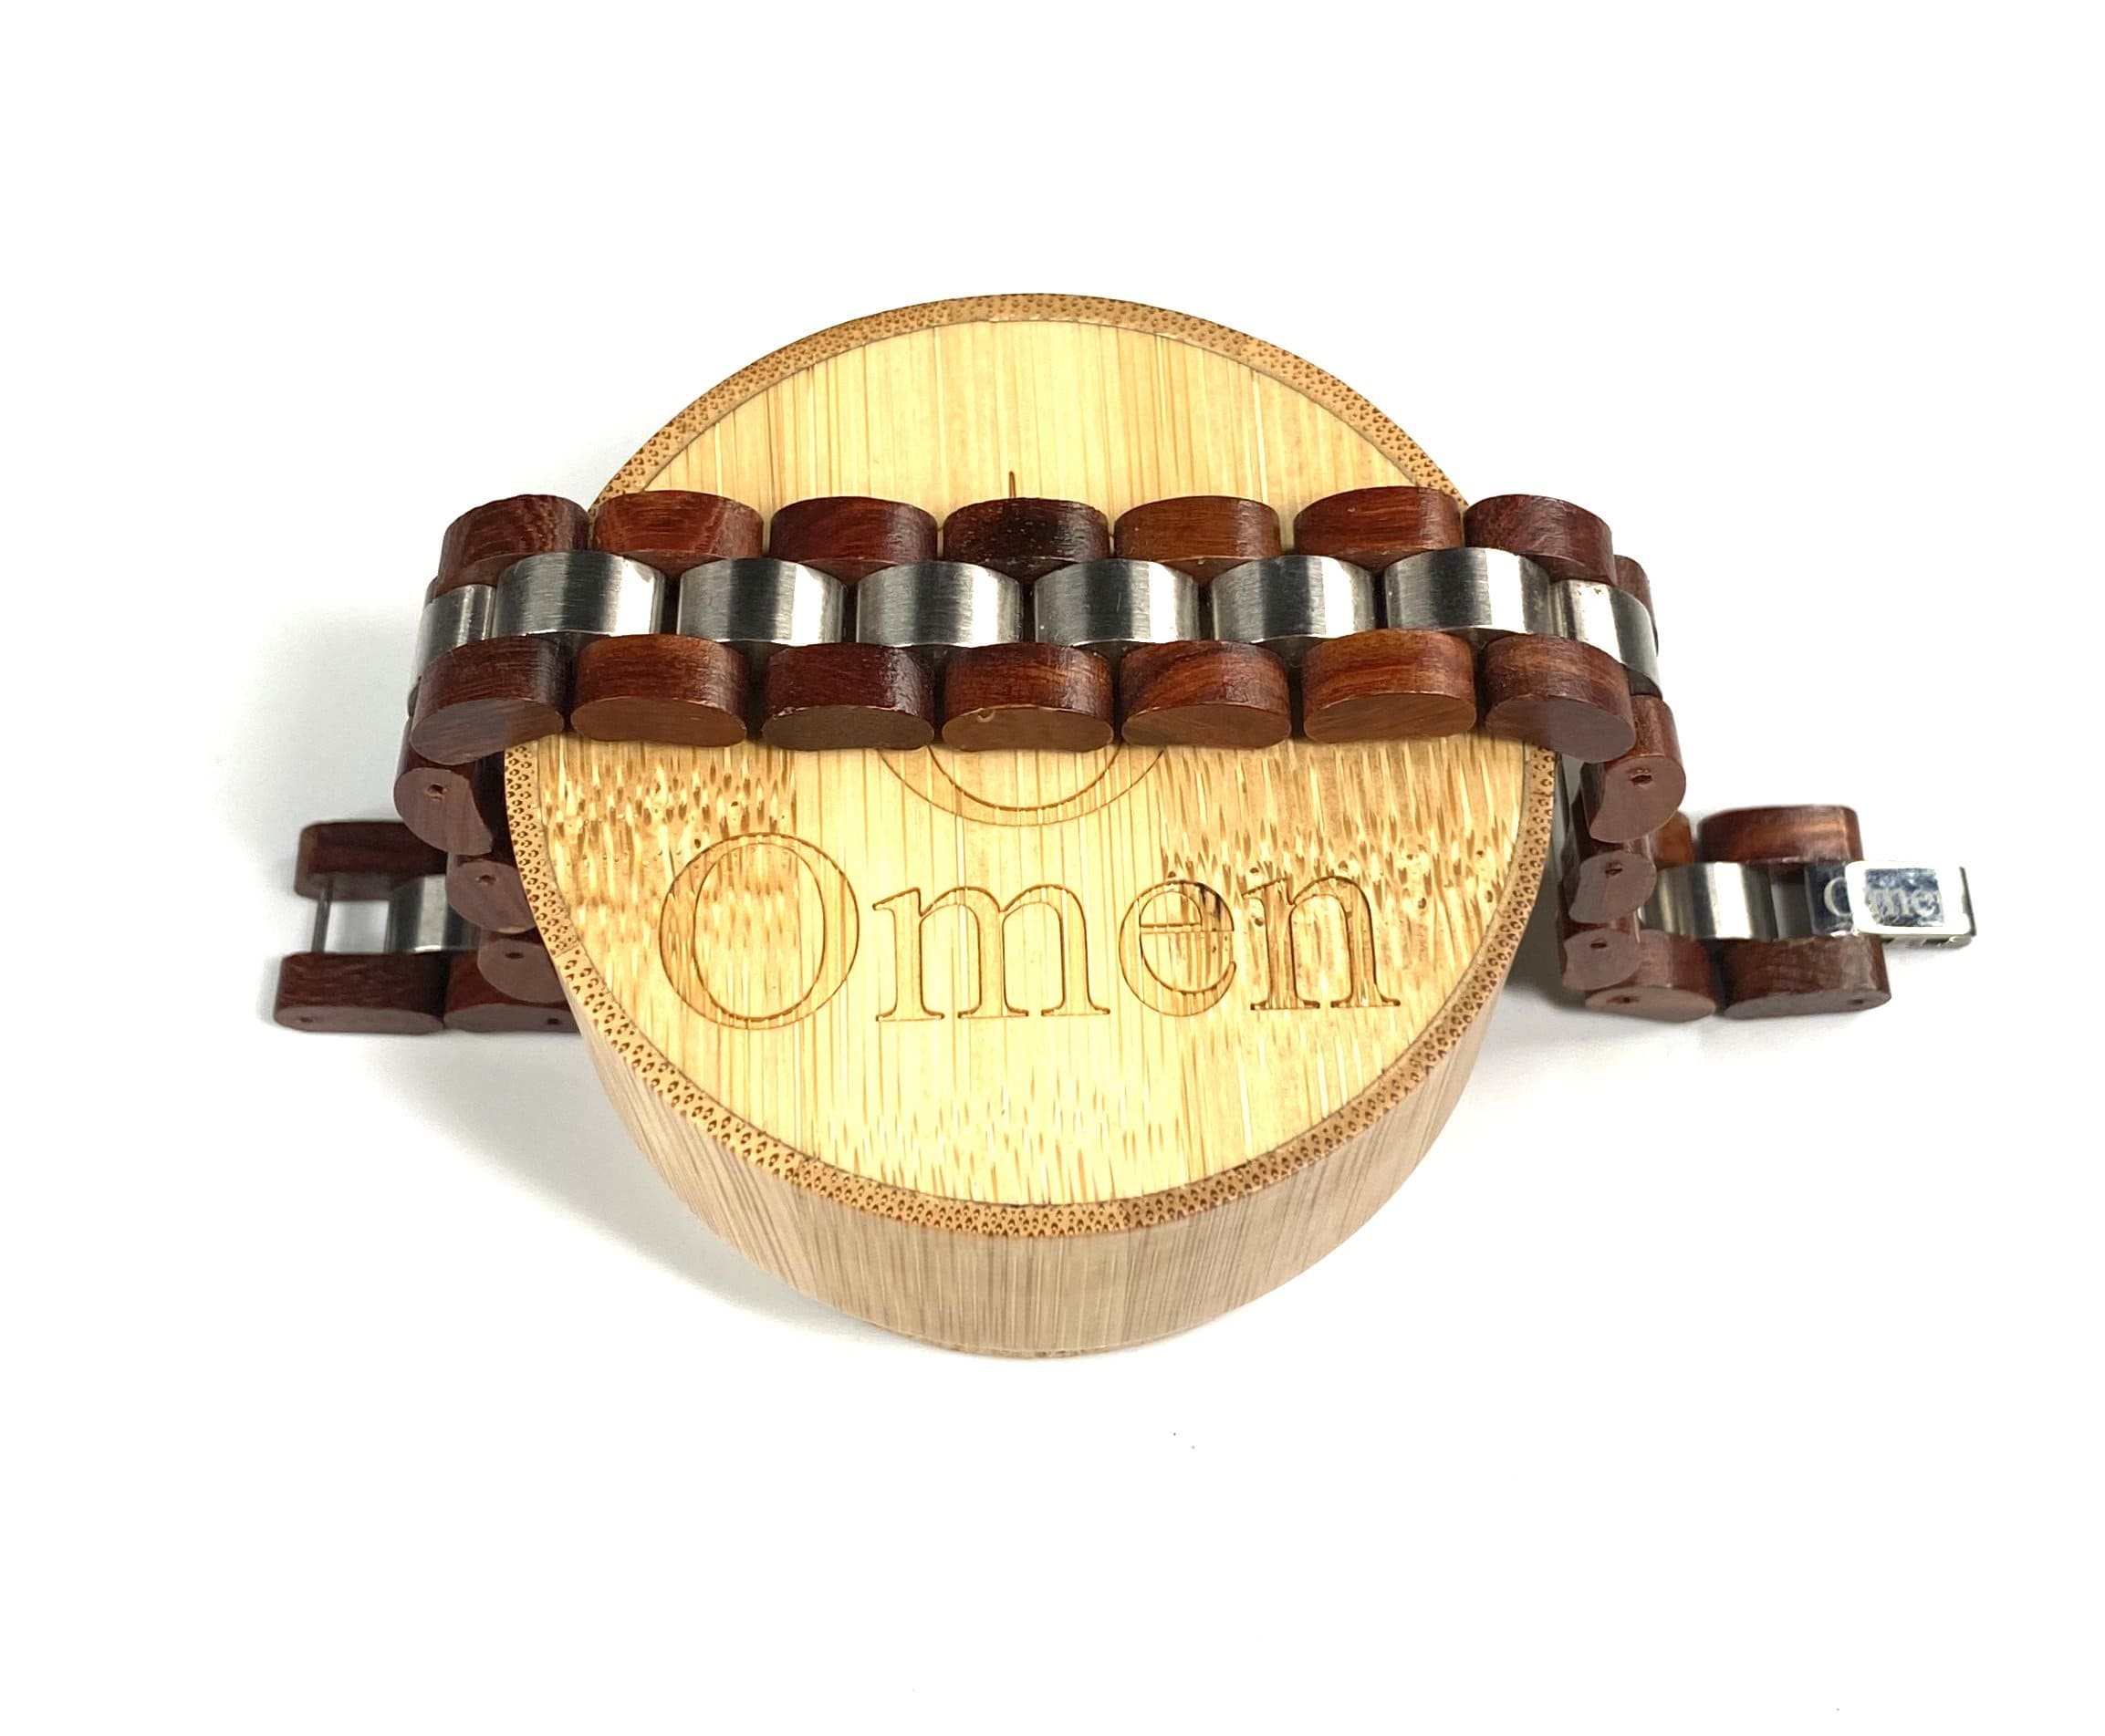 Cherry Wood and Stainless Steel Bracelet